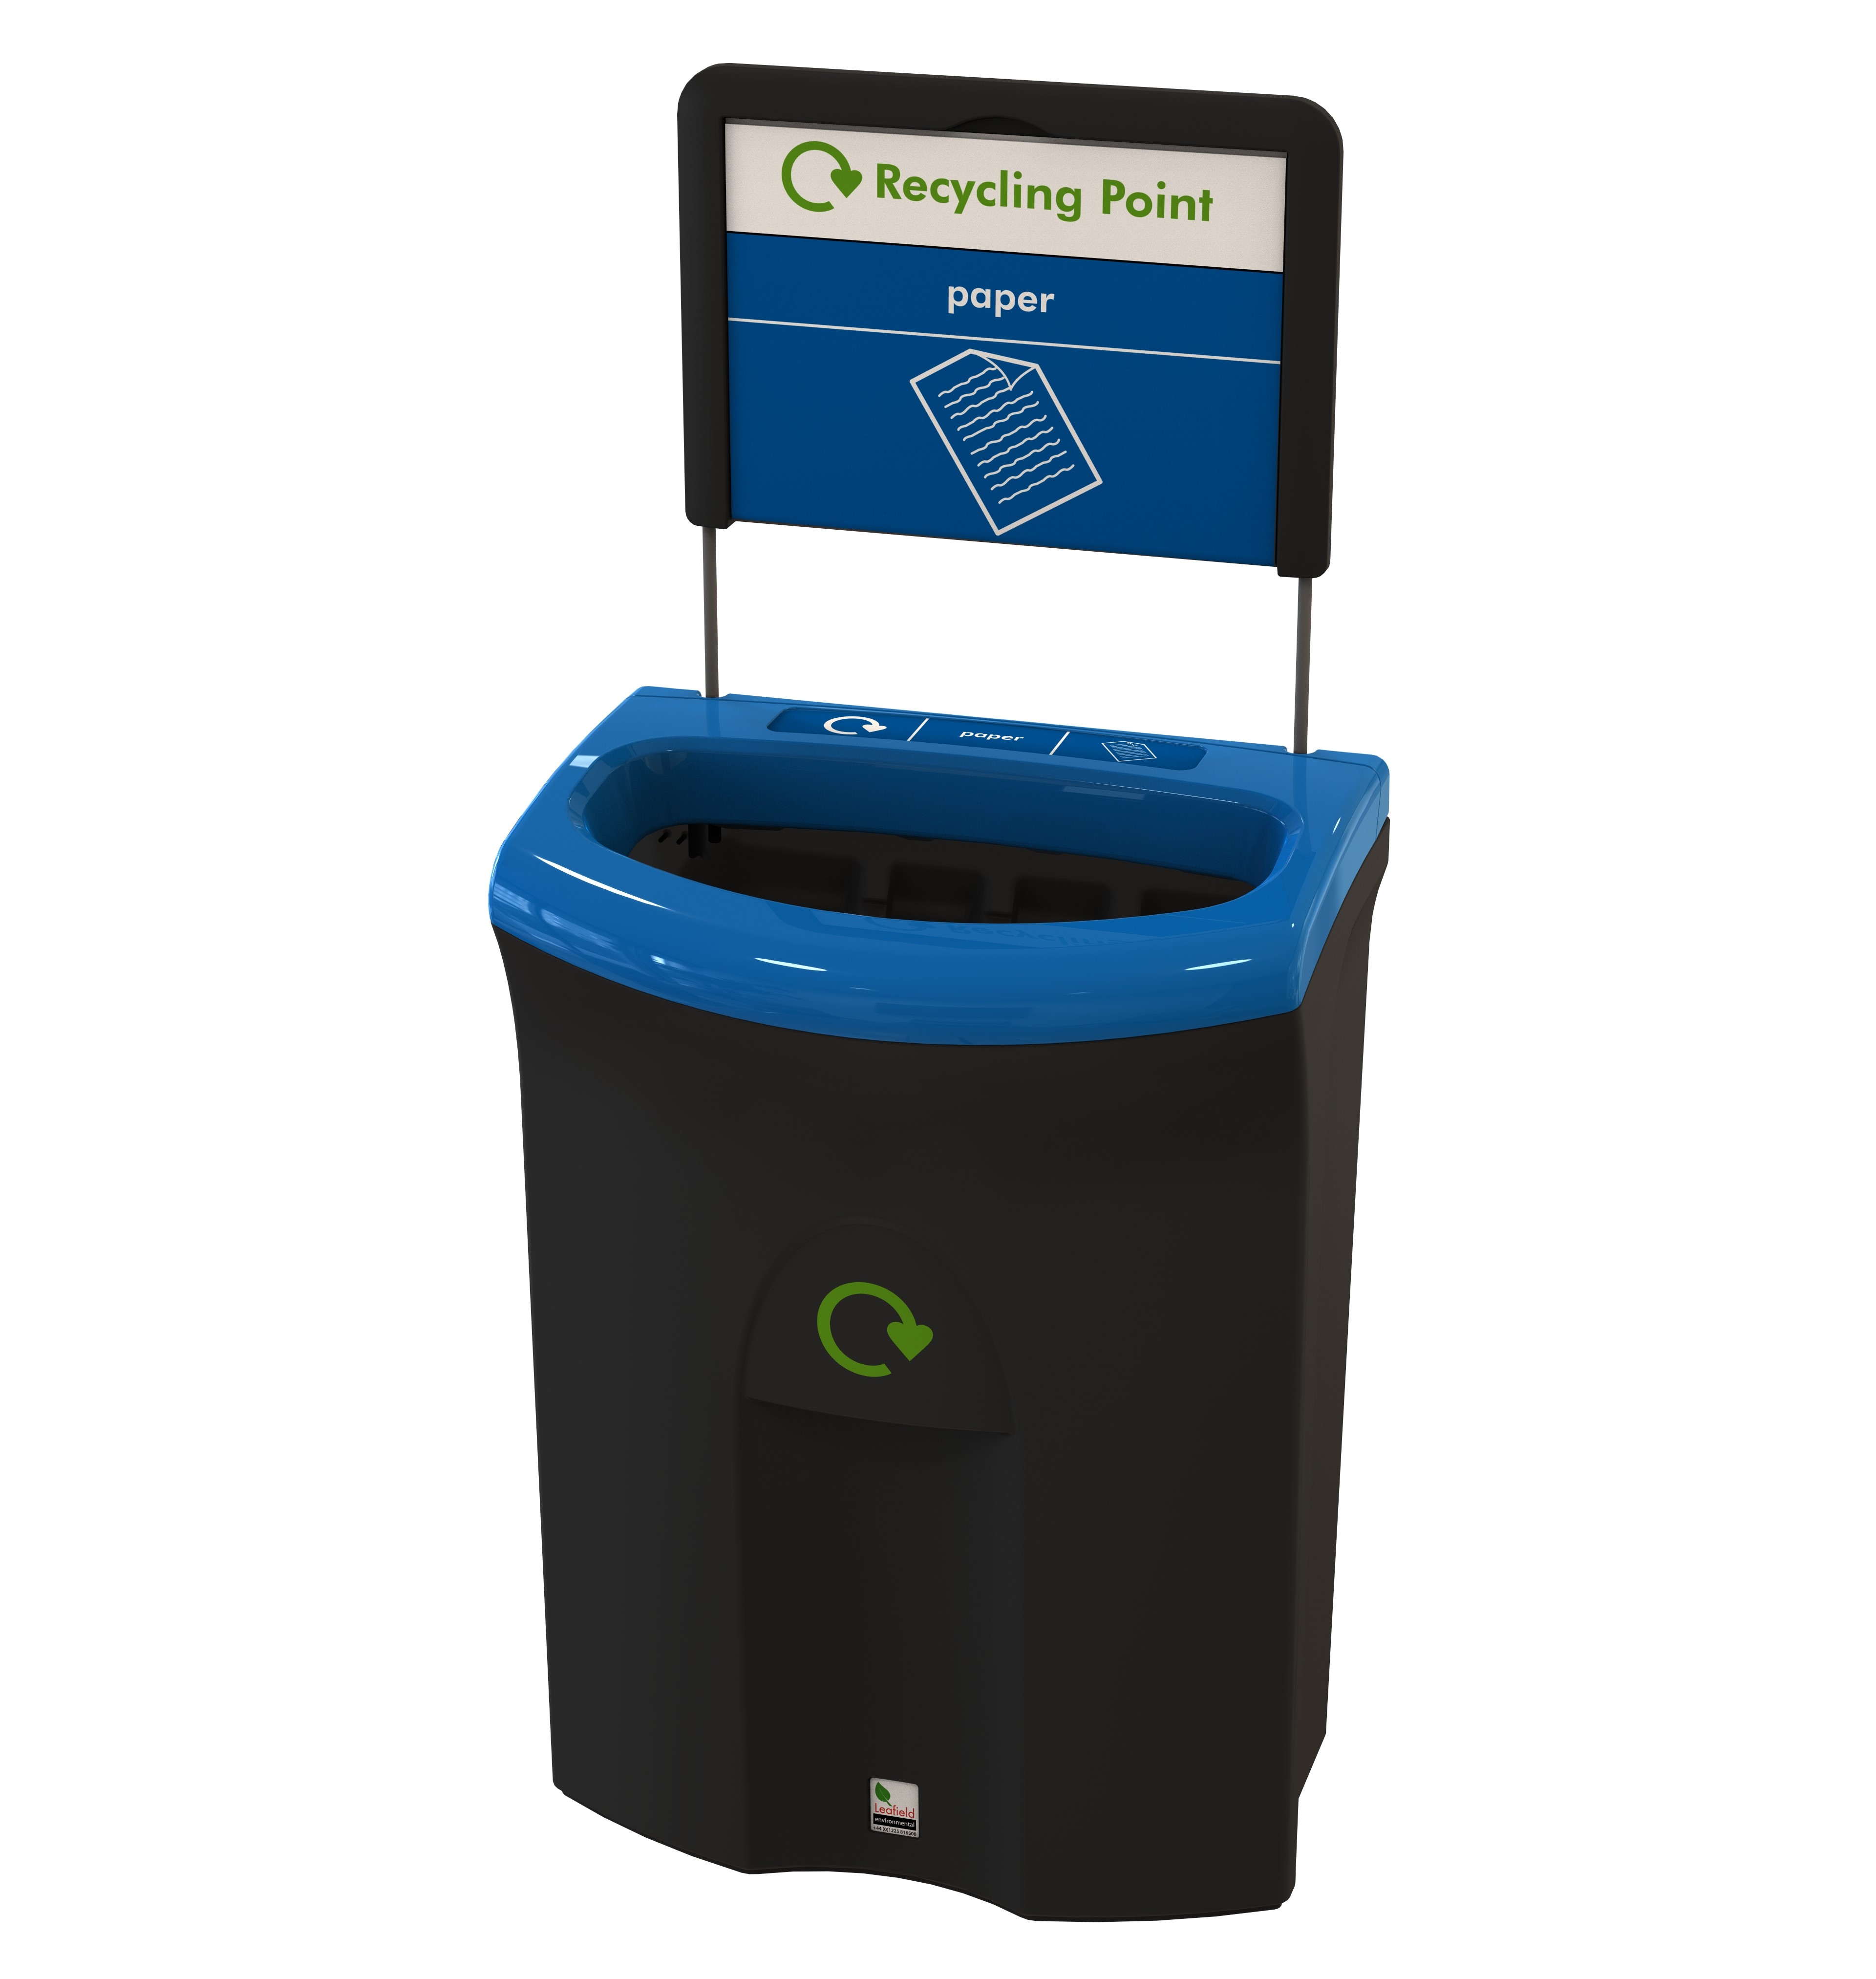 ClearStream PaperMax, X frame recycler, Clear paper recycling